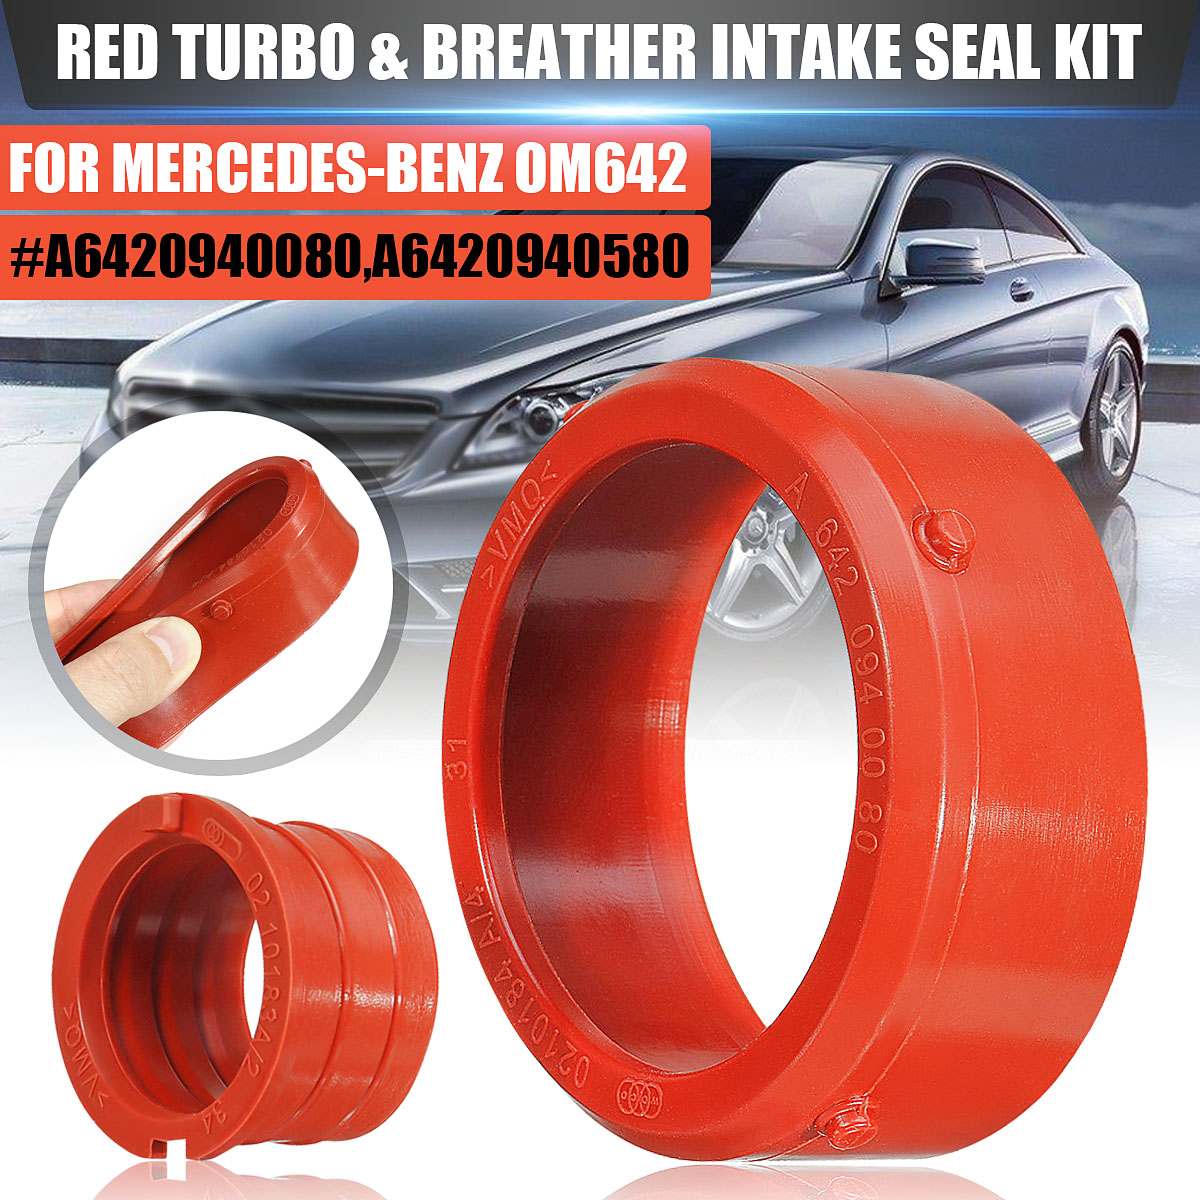 2pcs-Red-Turbo--Breather-Intake-Seal-Kit-For-Mercedes-Benz-OM642-A6420940080-A6420940580-1747599-1